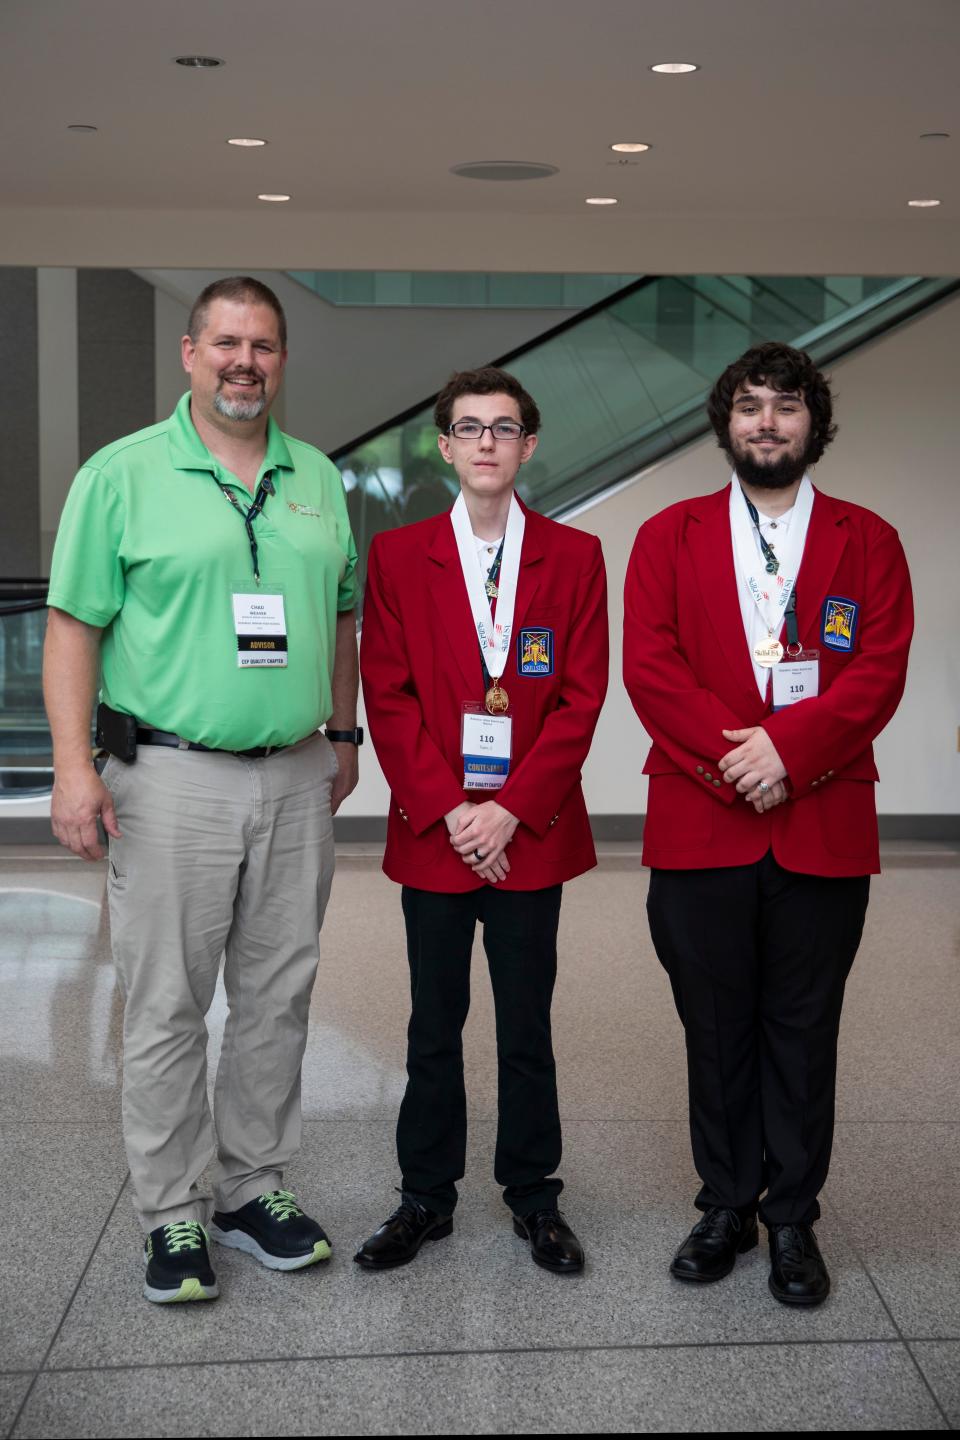 McKinley High School engineering students Collin Morrison, center, and Kaden Smith, right, will compete in the SkillsUSA National Leadership & Skills Conference. They are pictured with McKinley engineering teacher Chad Weaver.